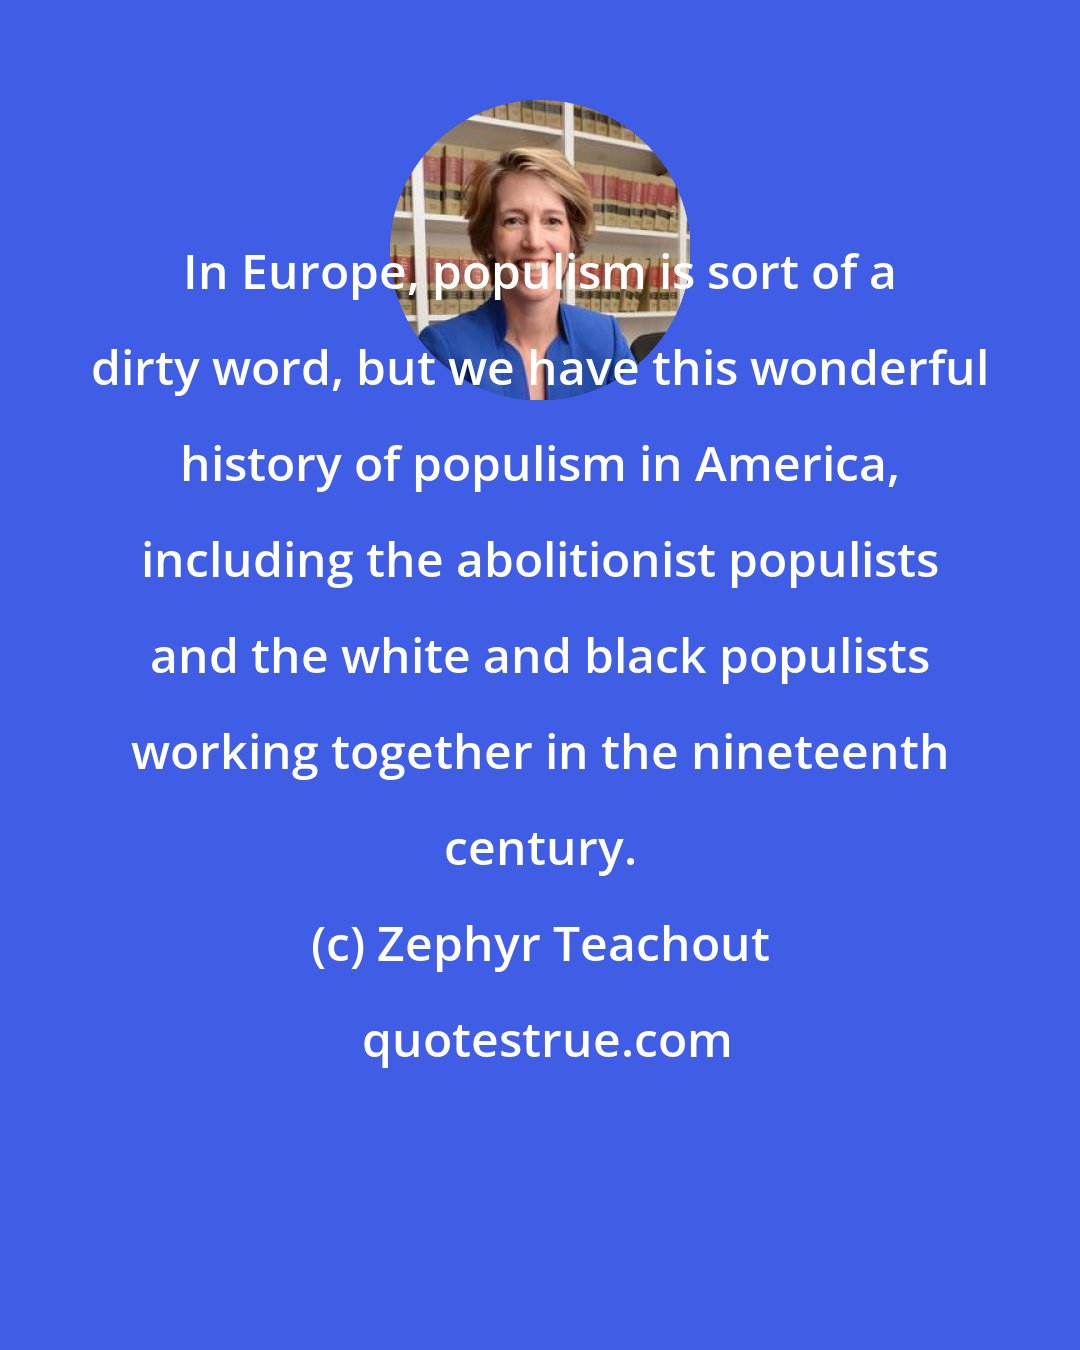 Zephyr Teachout: In Europe, populism is sort of a dirty word, but we have this wonderful history of populism in America, including the abolitionist populists and the white and black populists working together in the nineteenth century.